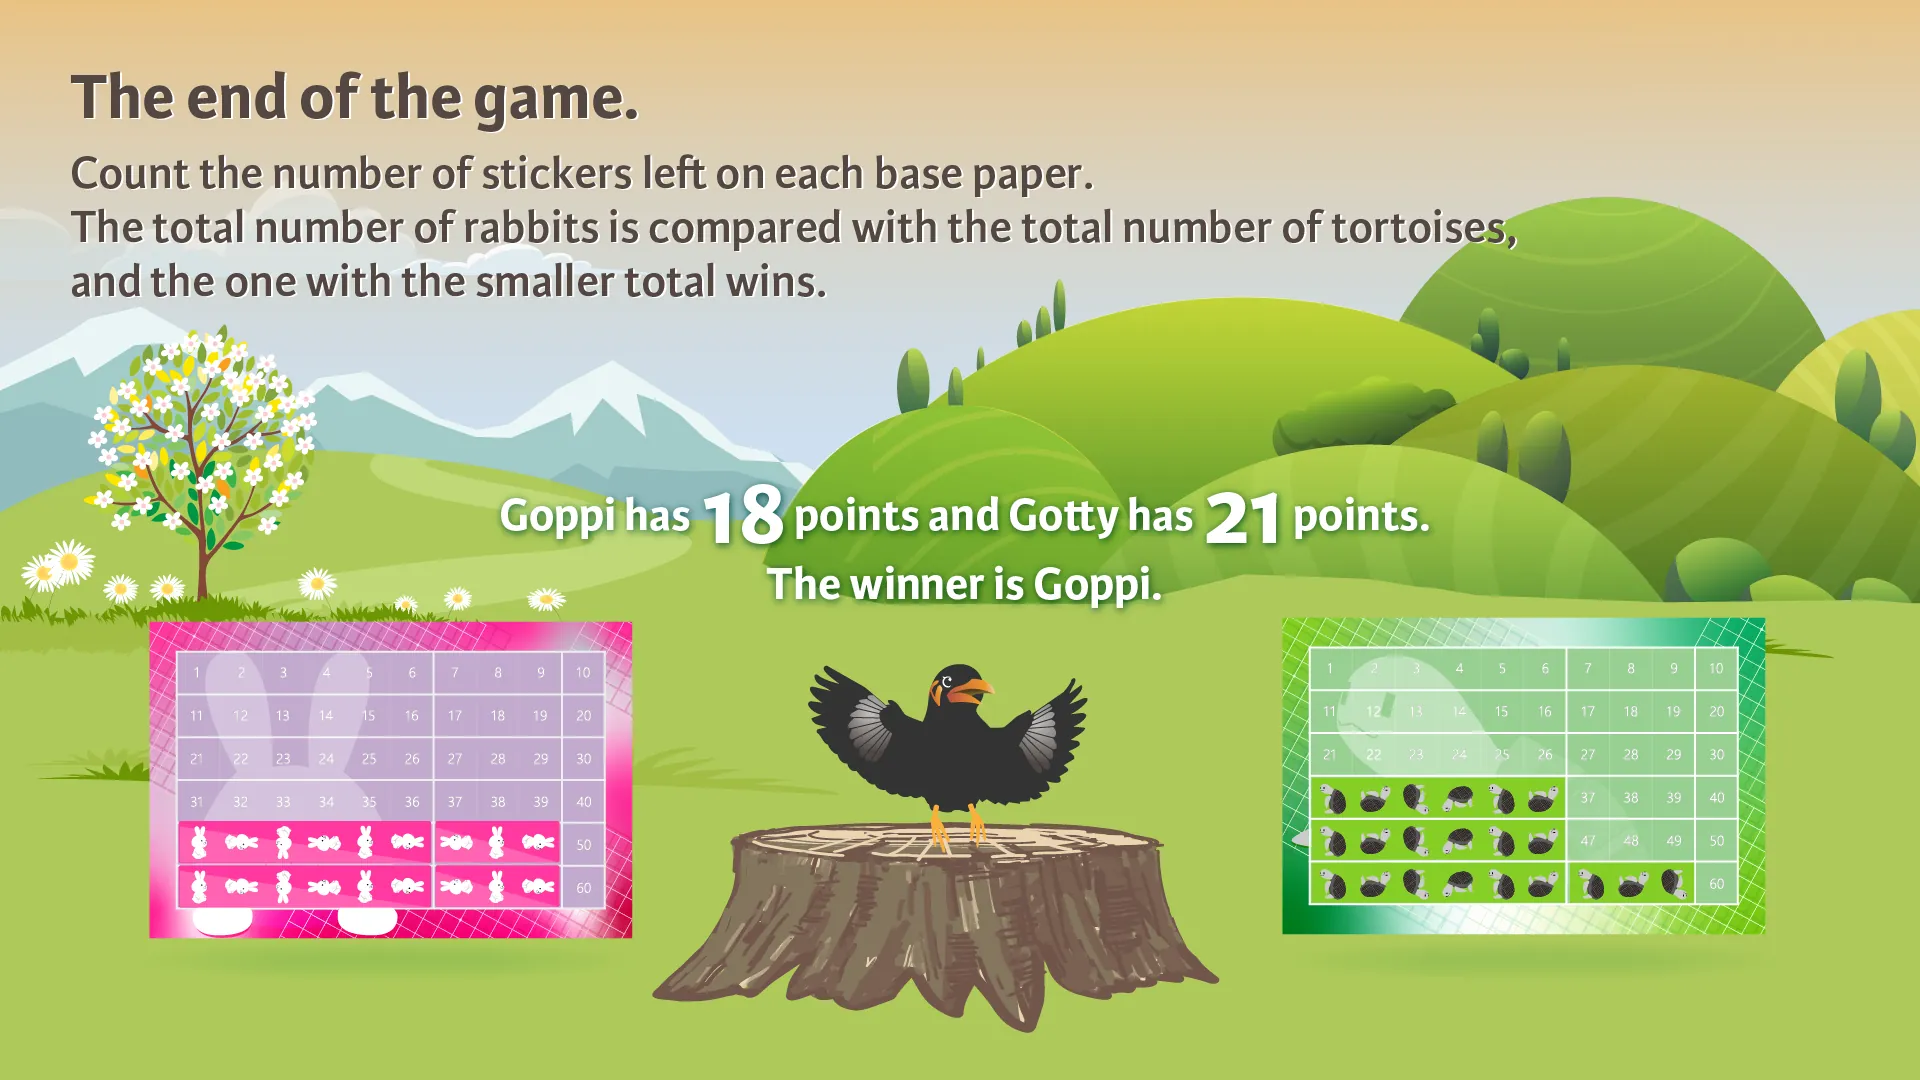 The end of the game.Count the number of stickers left on each base paper.The total number of rabbits is compared with the total number of tortoises, and the one with the smaller total wins.Goppi has 18 points and Gotty has 21 points.The winner is Goppi.